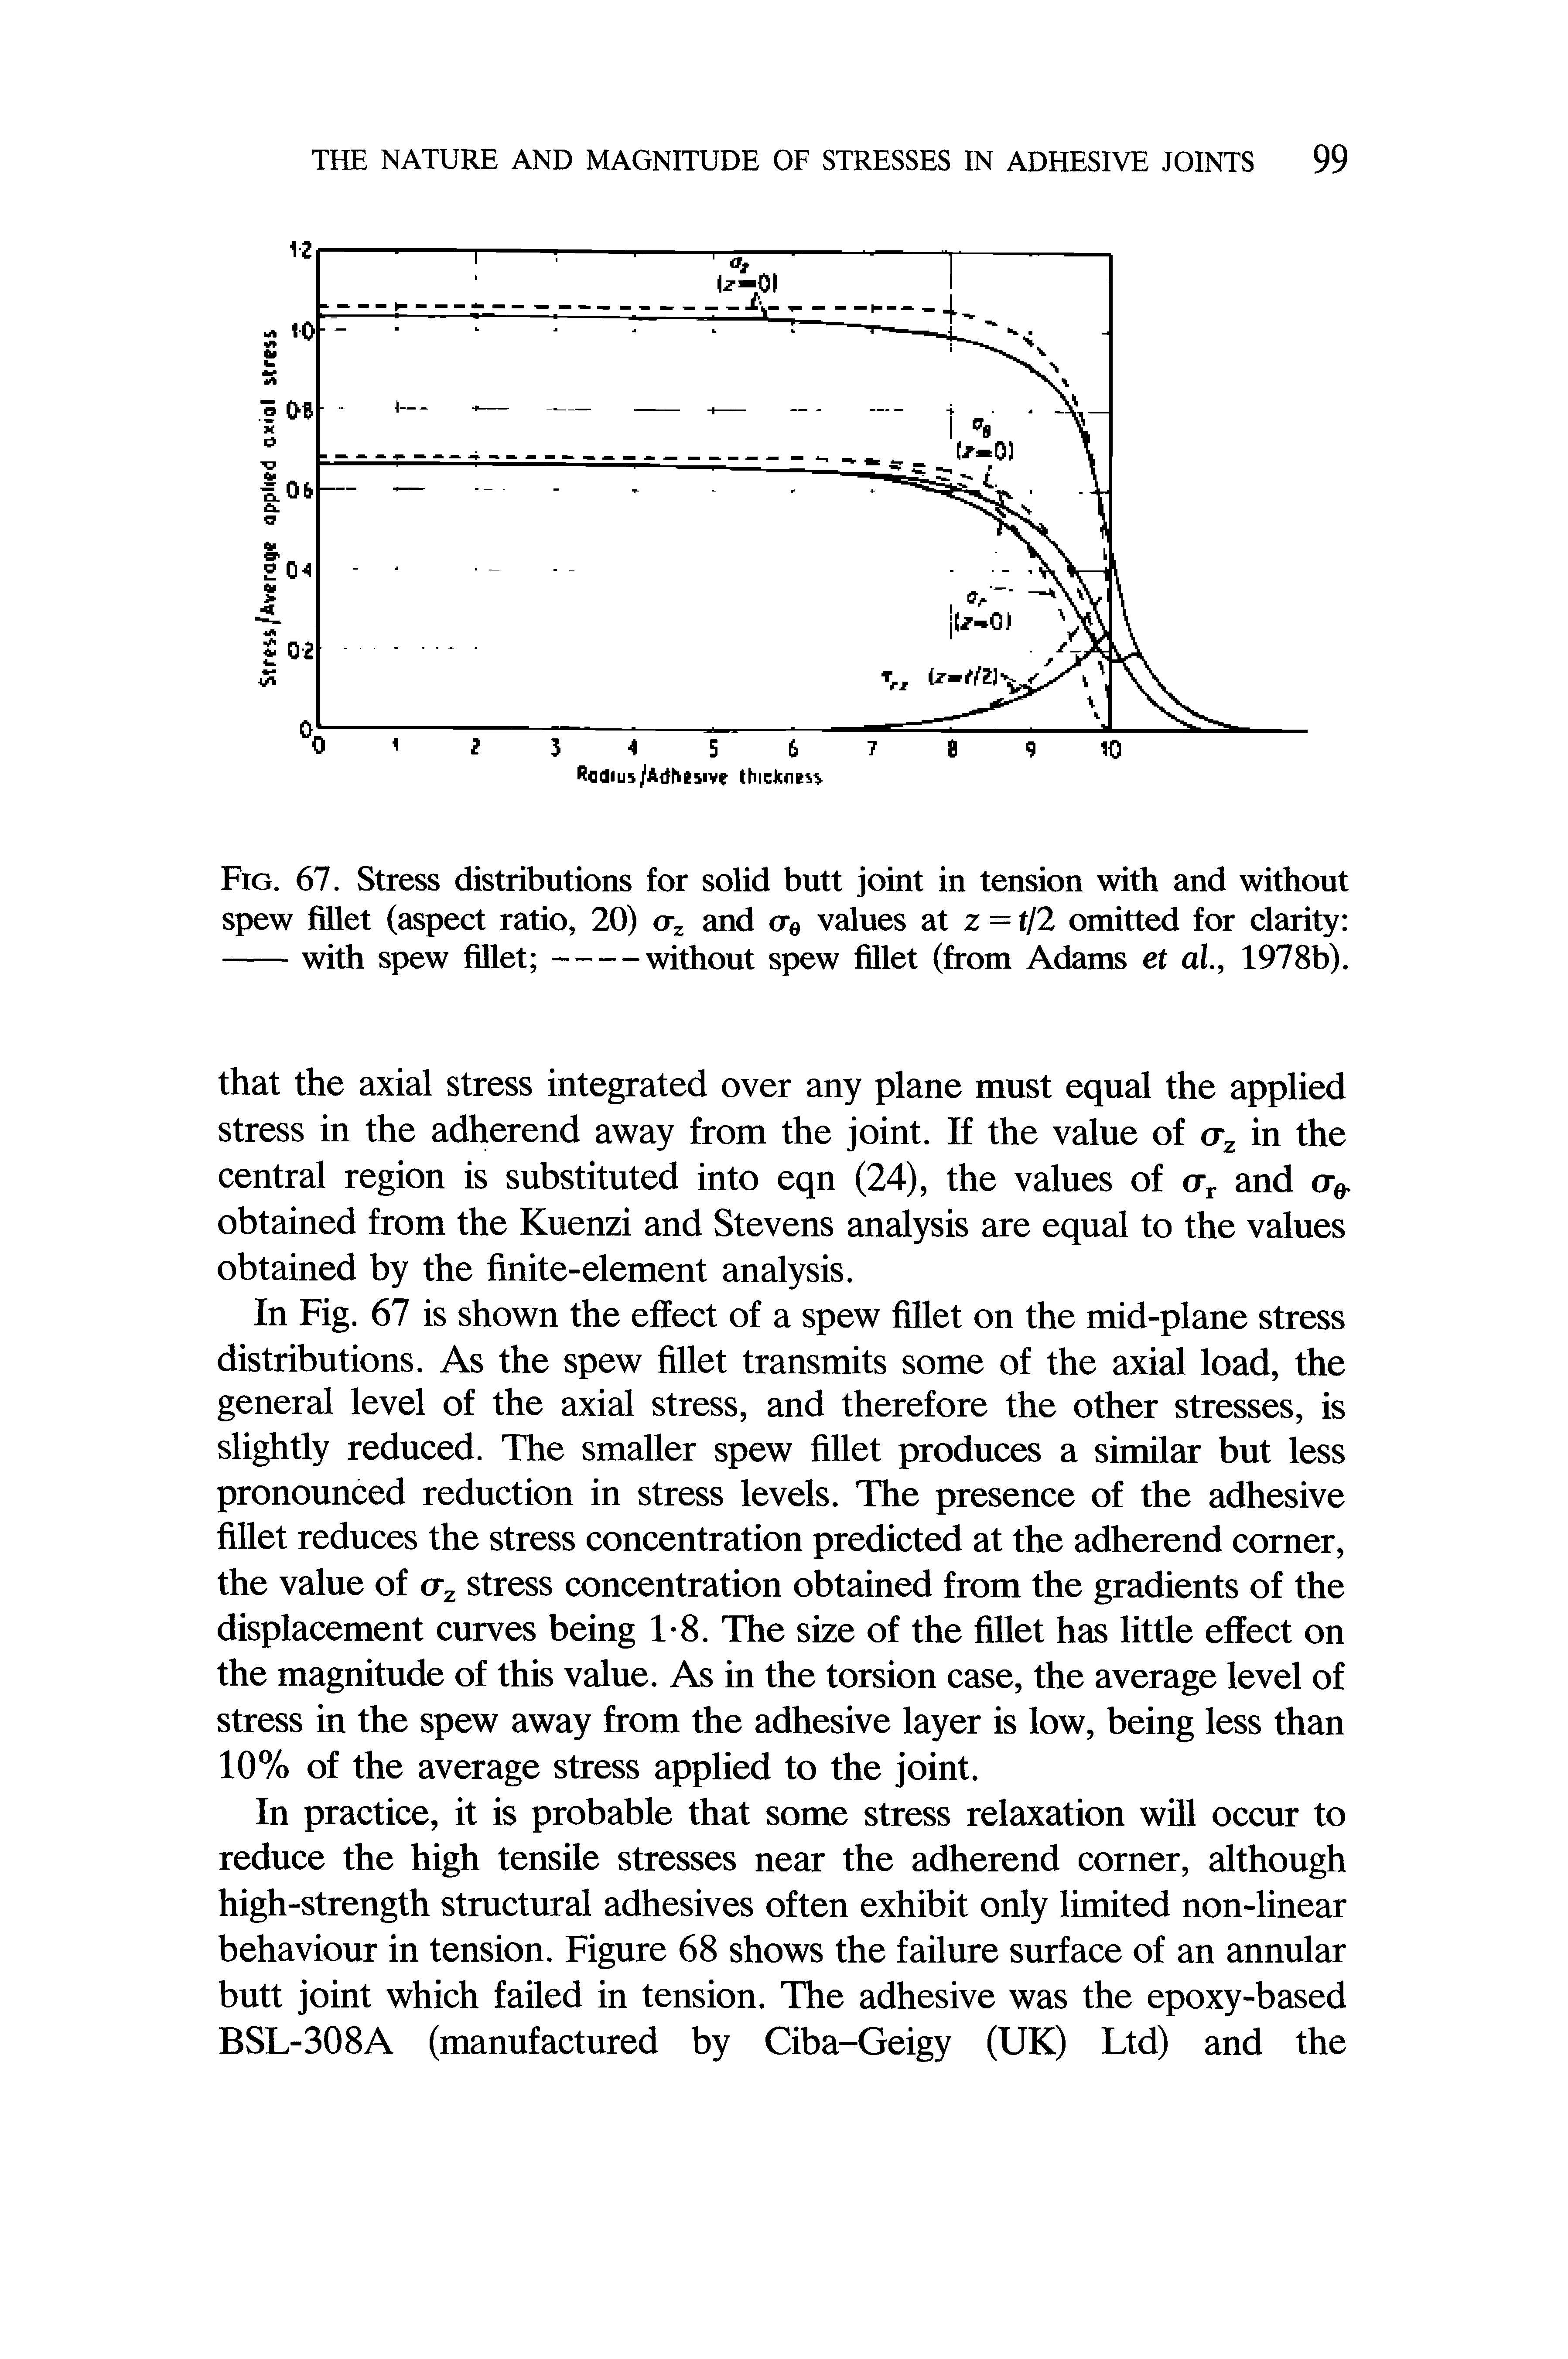 Fig. 67. Stress distributions for solid butt joint in tension with and without spew fillet (aspect ratio, 20) and ere values at z = t/2 omitted for clarity -----with spew fillet ---------without spew fillet (from Adams et al, 1978b).